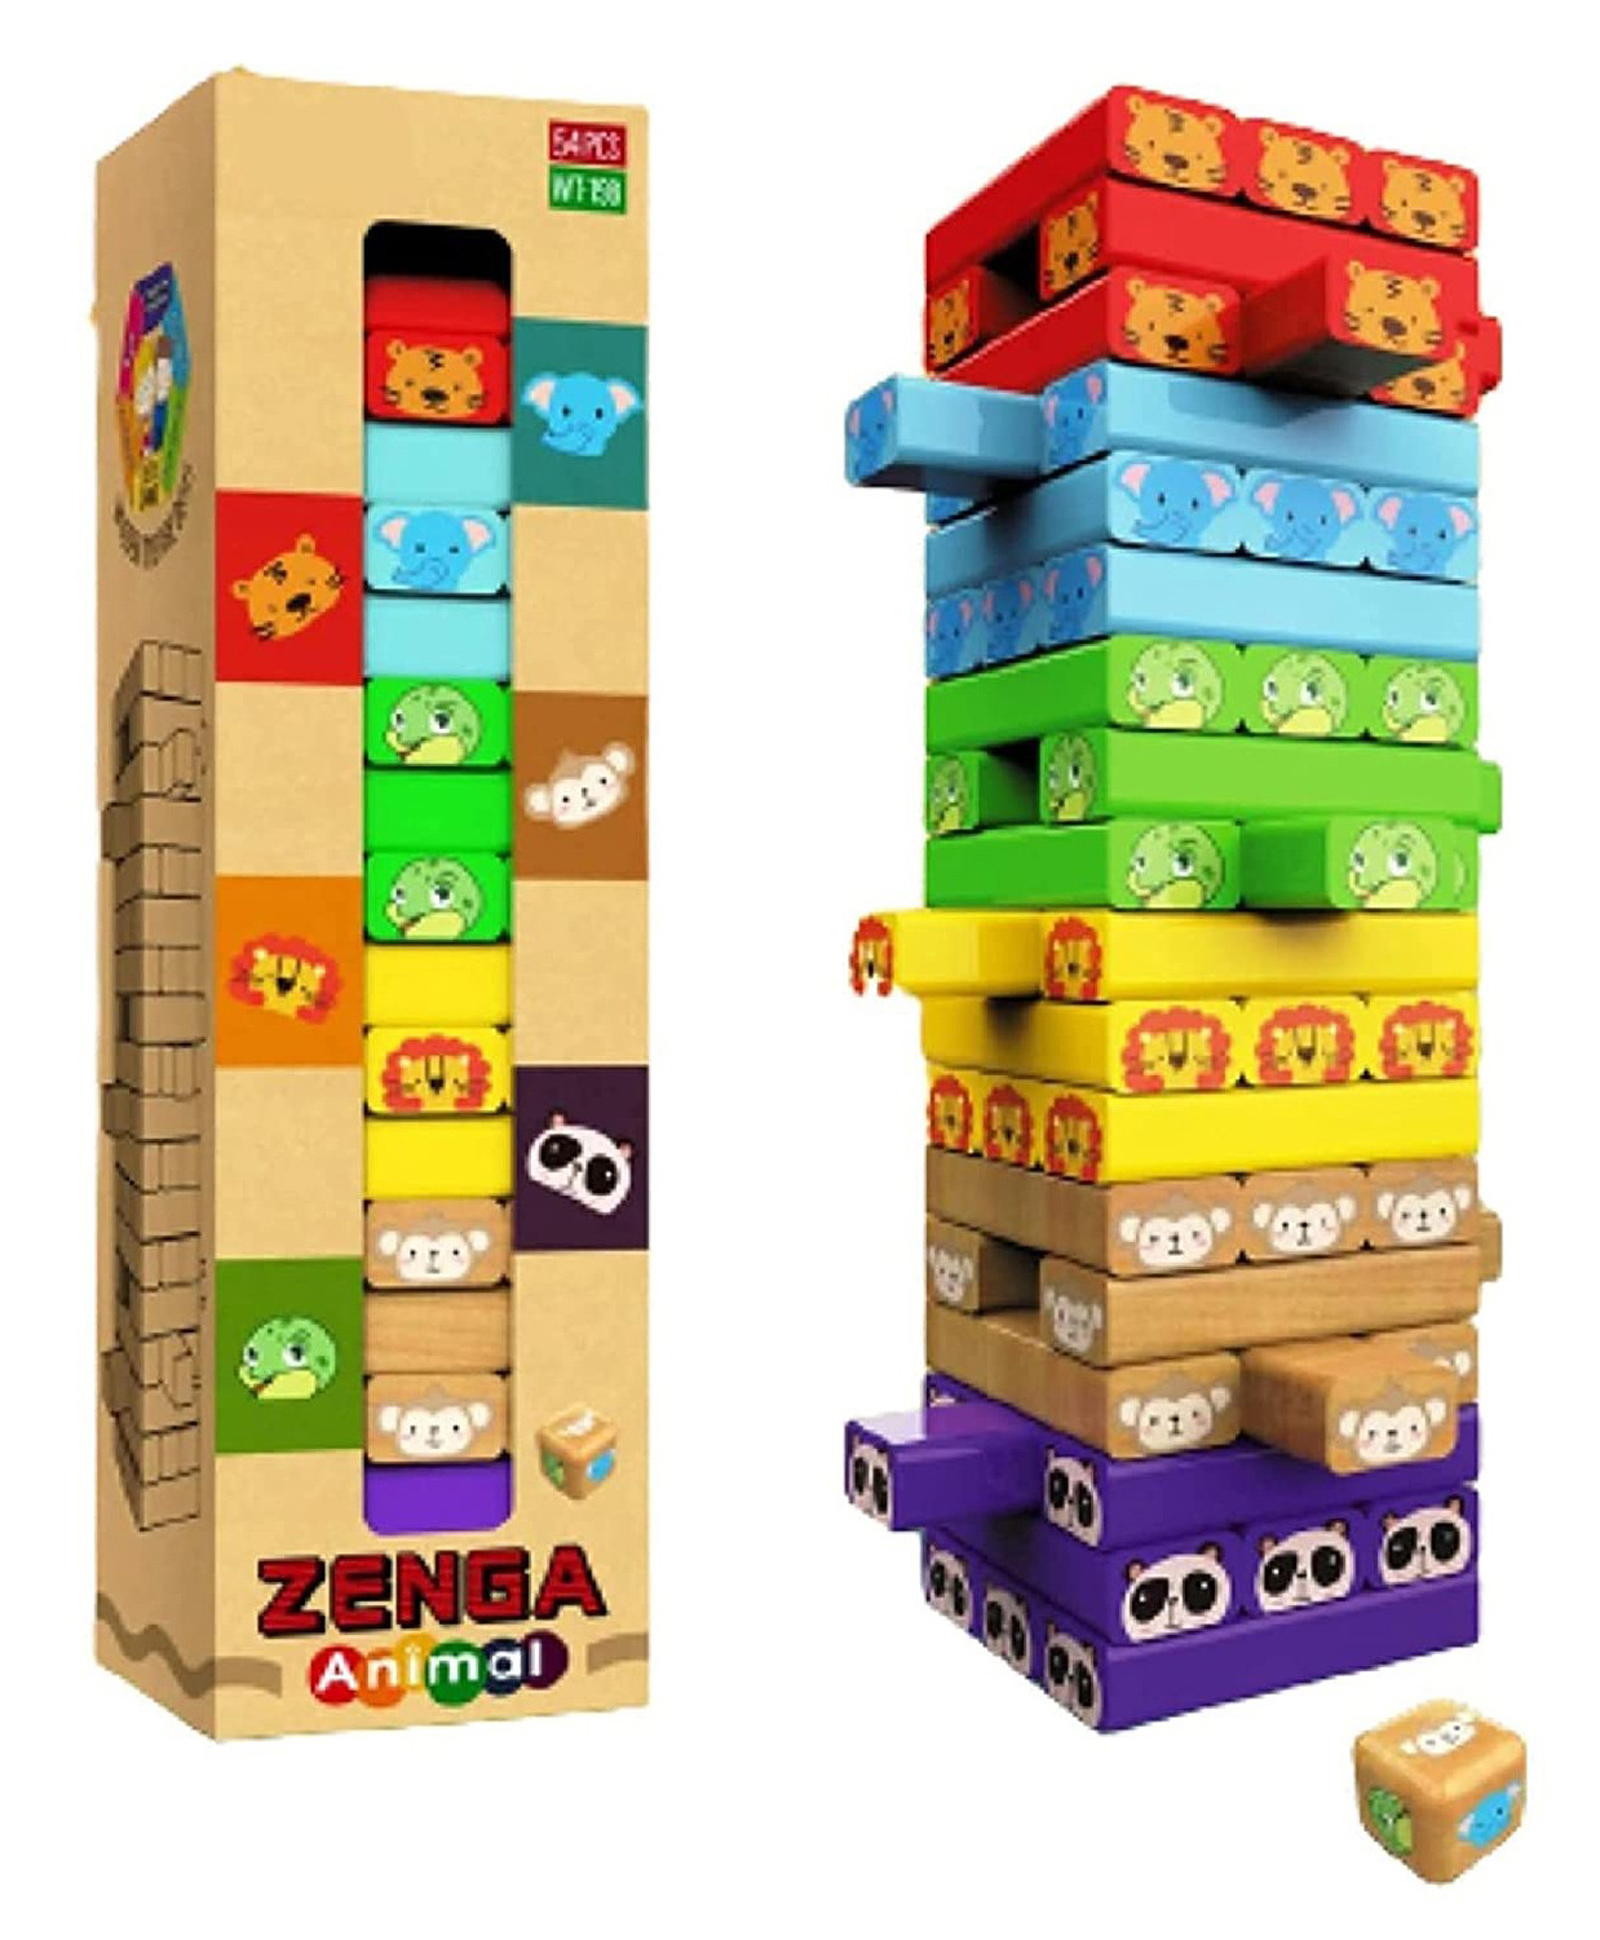 Yamama Classic Animal Wooden Blocks Game Multicolor - 54 Pieces Online  India, Buy Building & Construction Toys for (3-8 Years) at  -  9369787